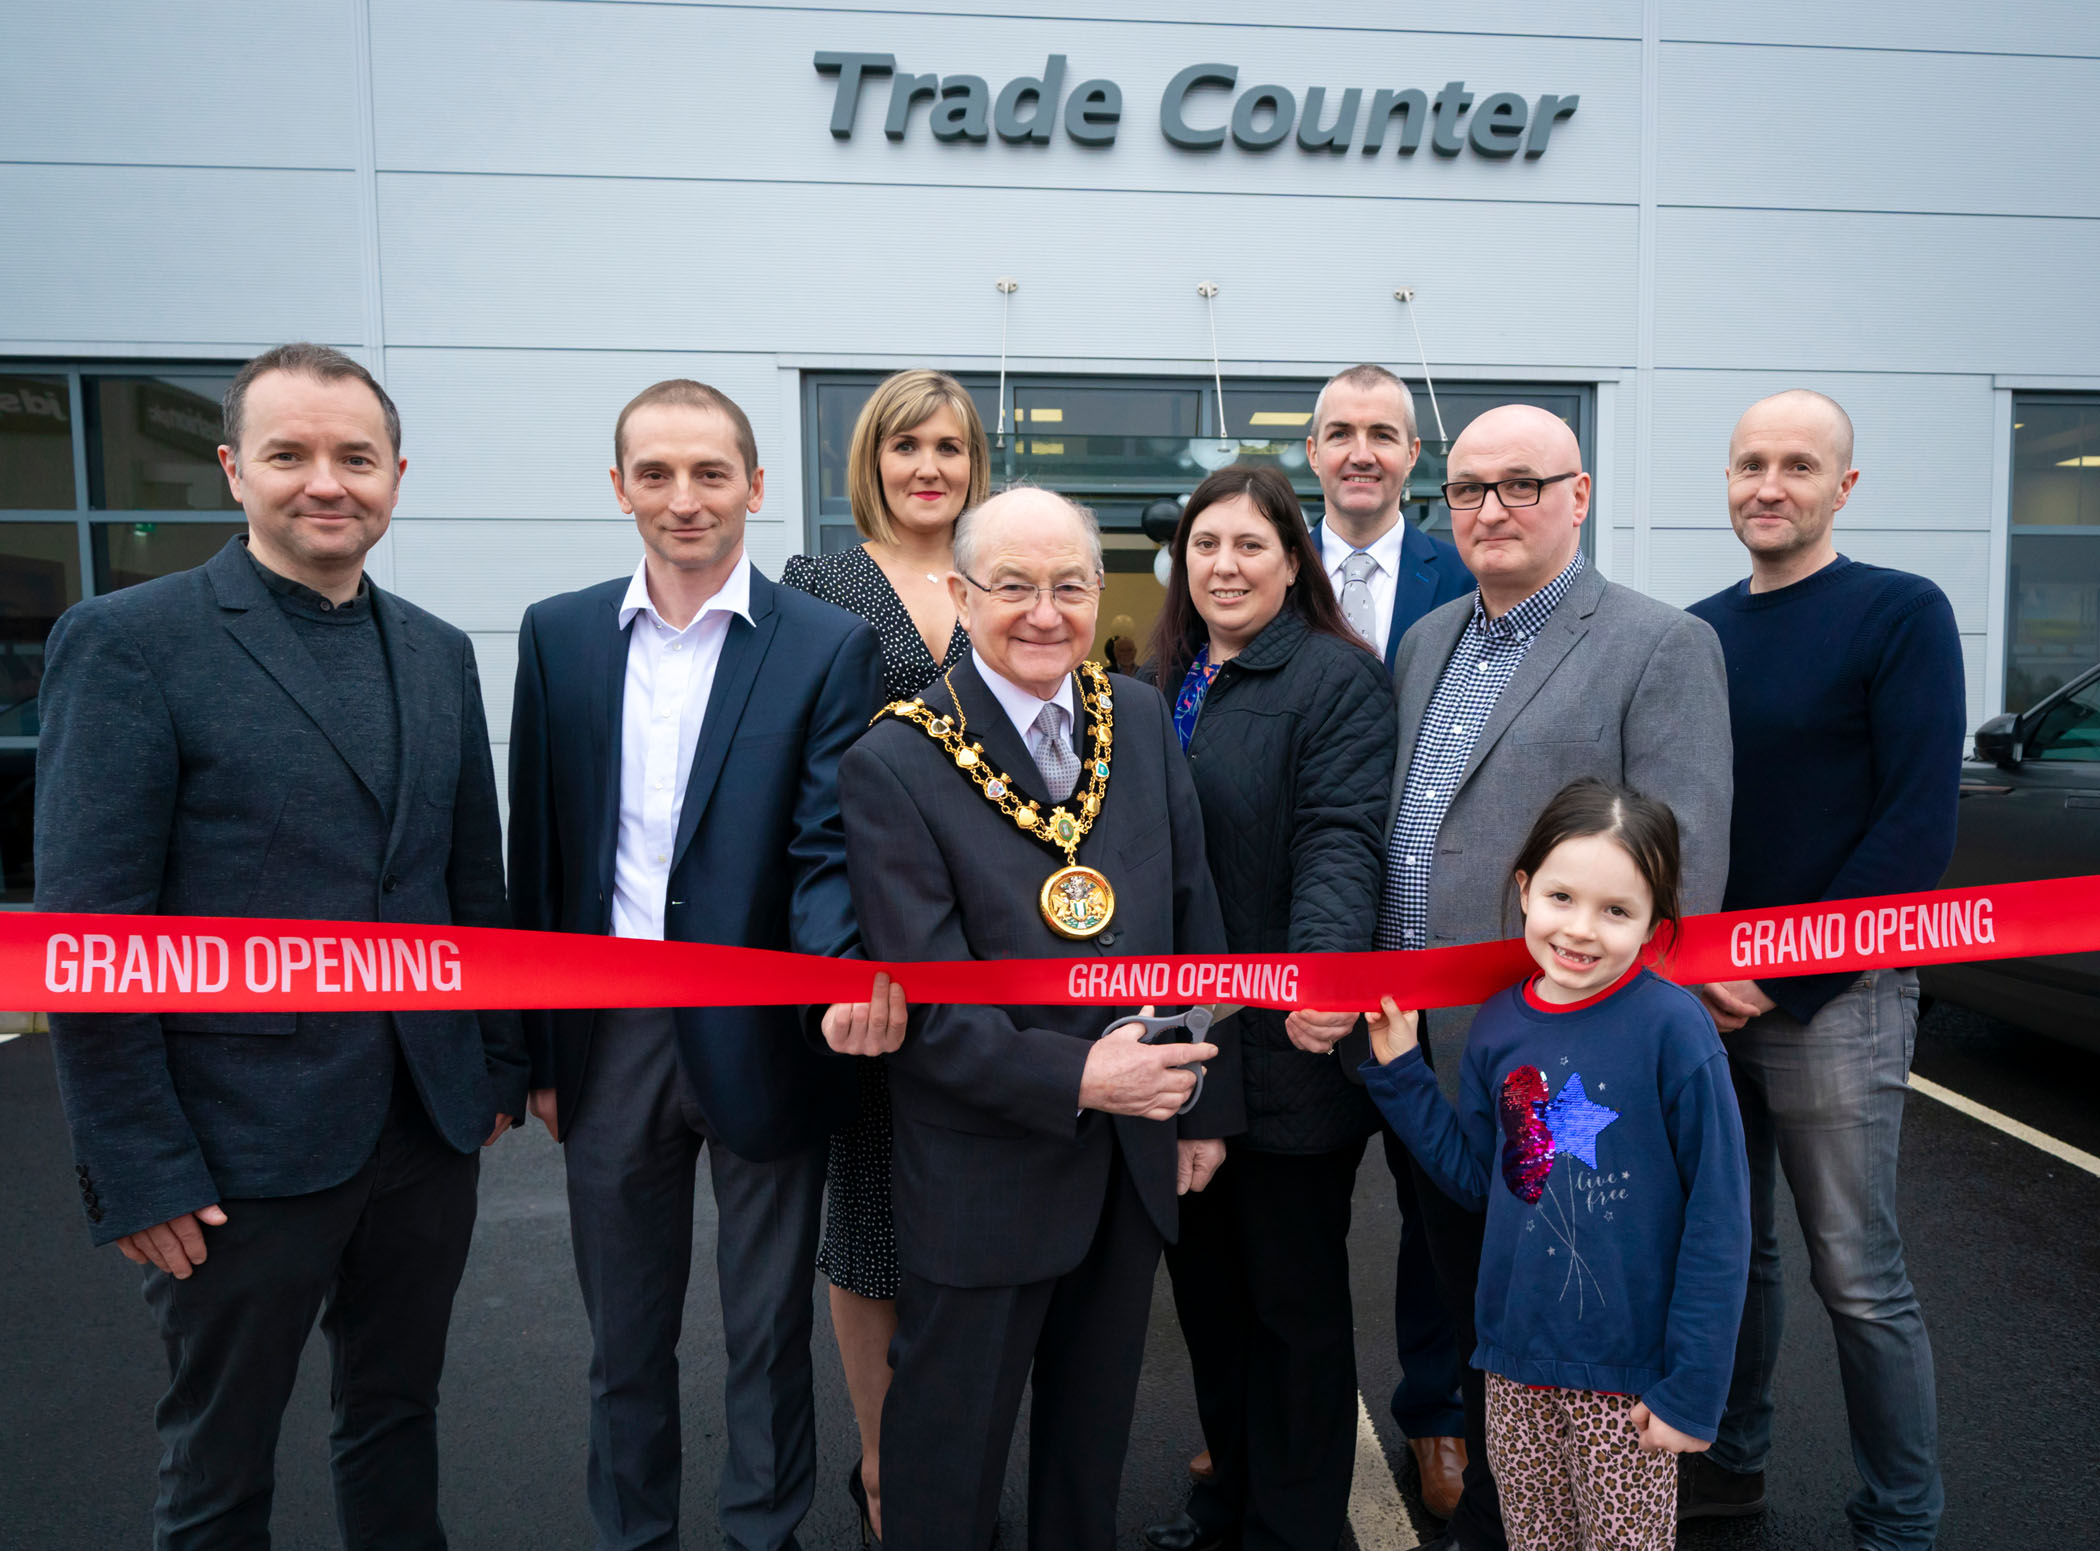 Image: Trade Mouldings officially opens its new 75,000 sq ft distribution centre on six acre site